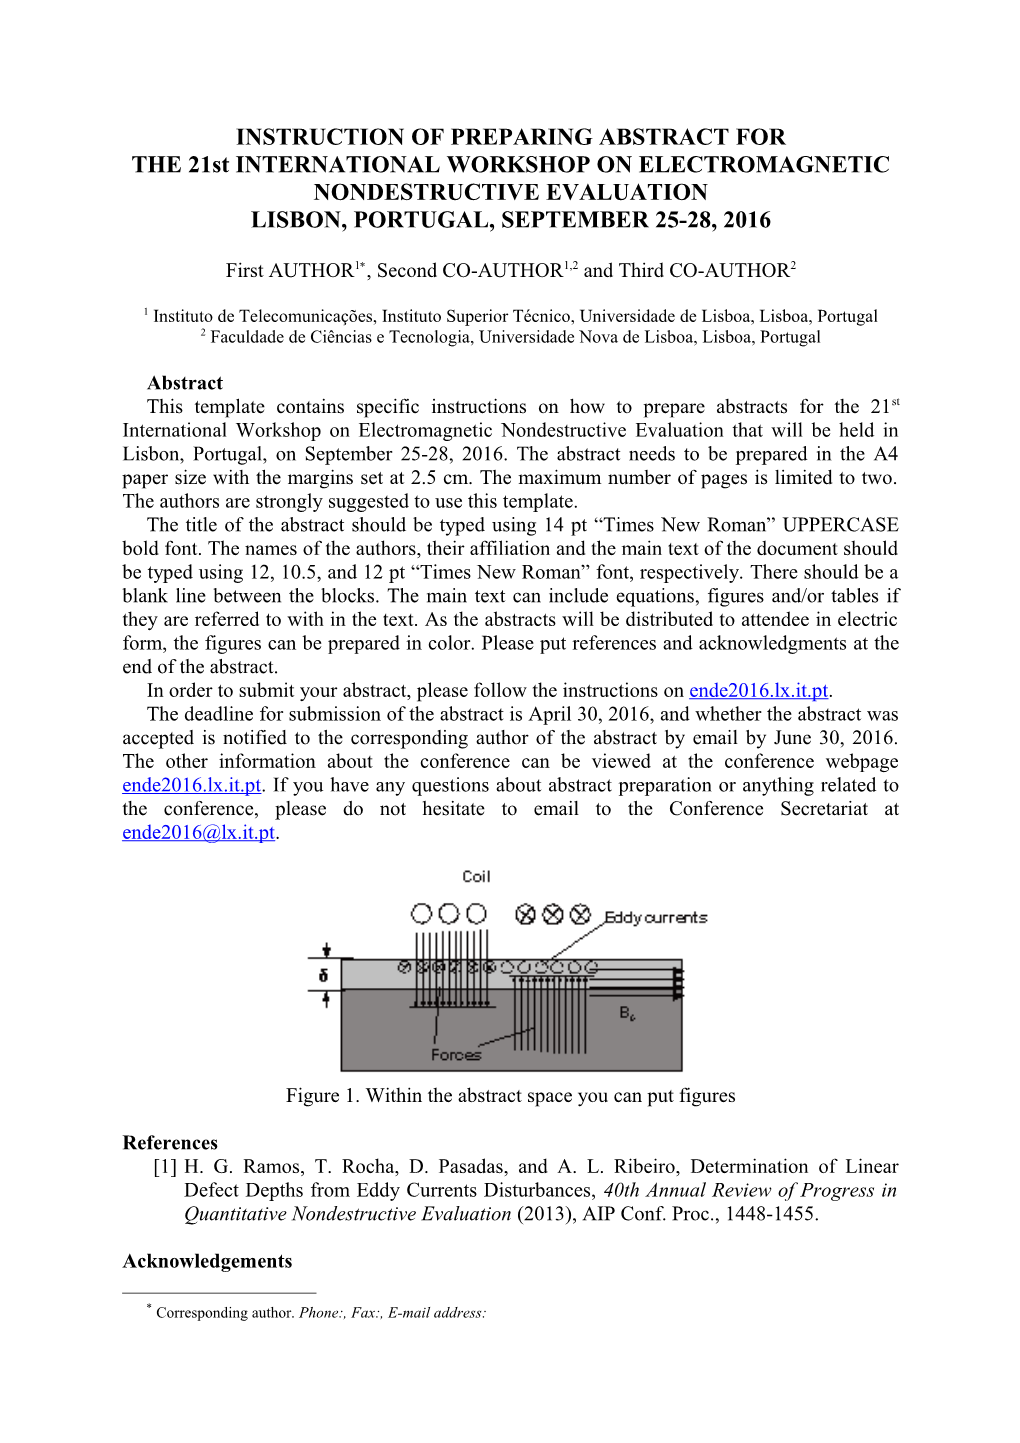 Abstract Preparation Instructions for the 12Th International Workshop on Electromagnetic